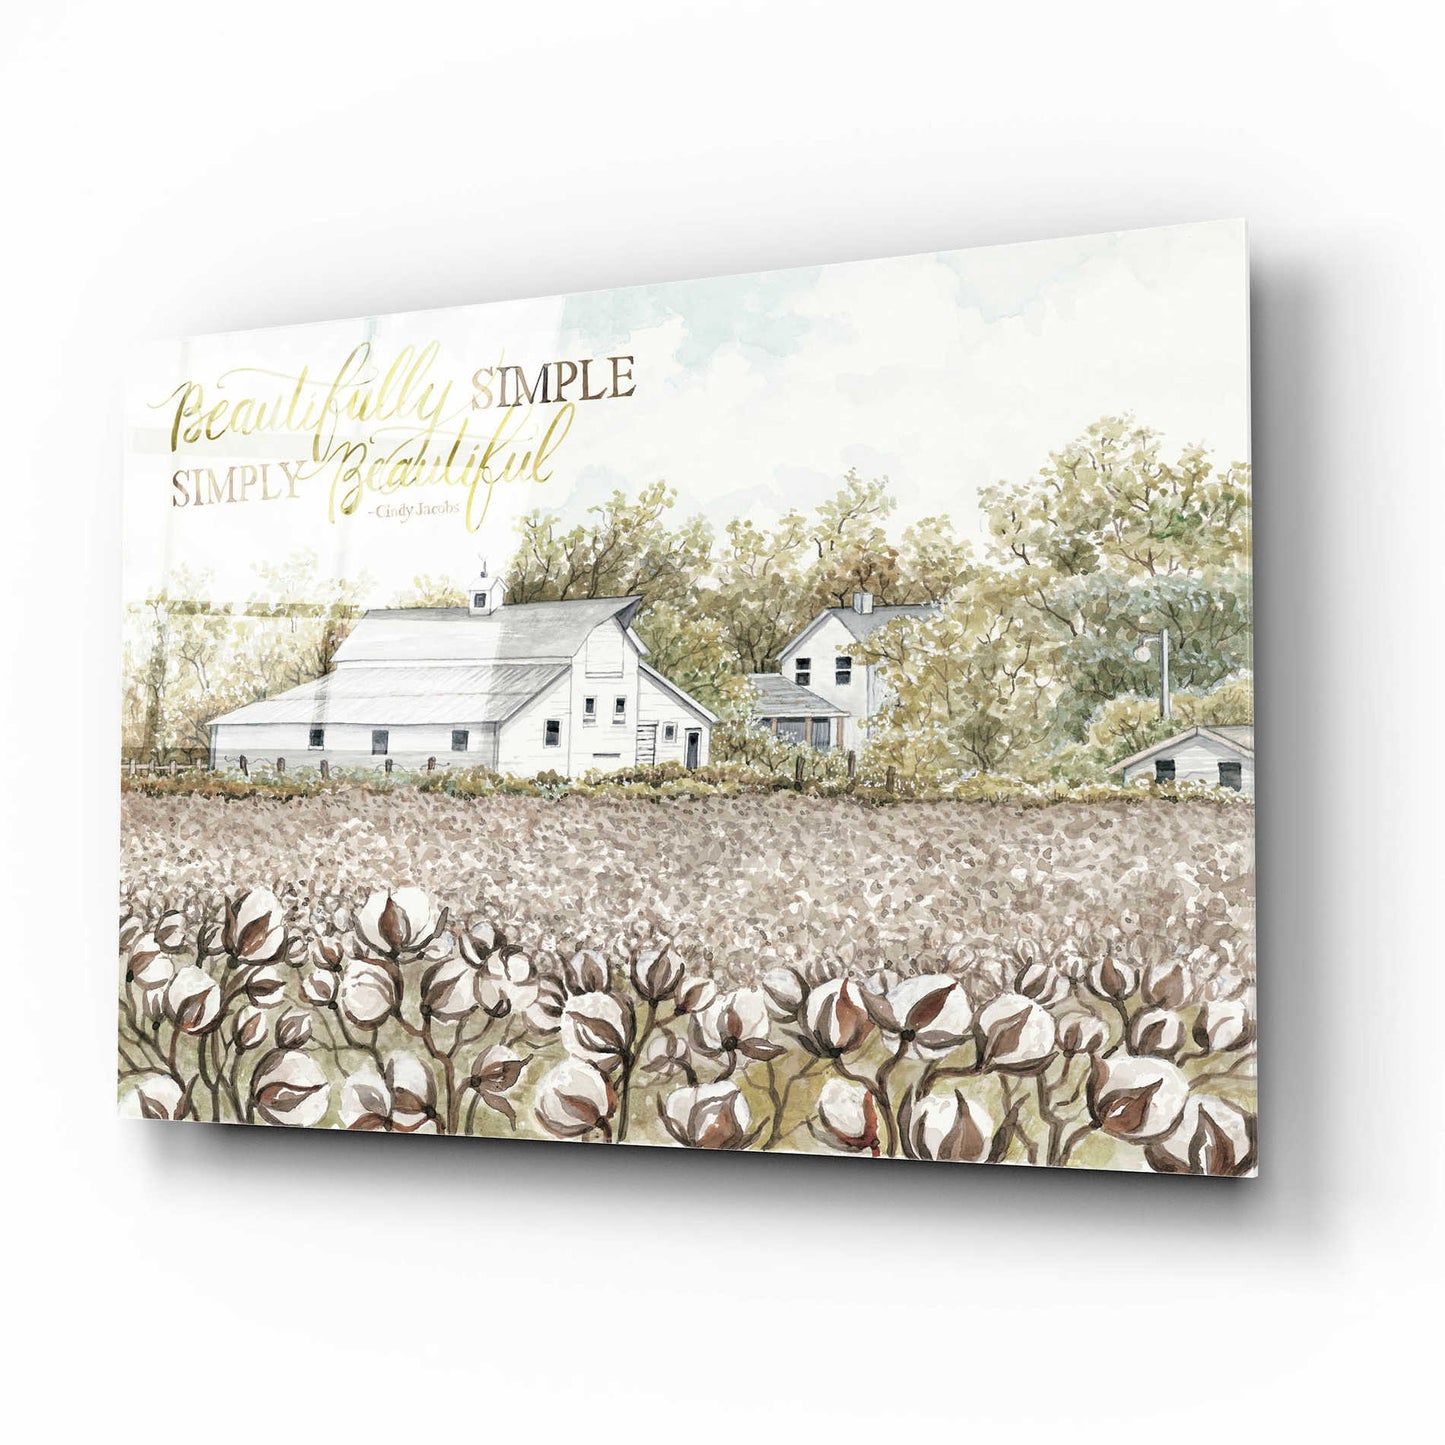 Epic Art 'Beautifully Simple Cotton Farm' by Cindy Jacobs, Acrylic Glass Wall Art,16x12